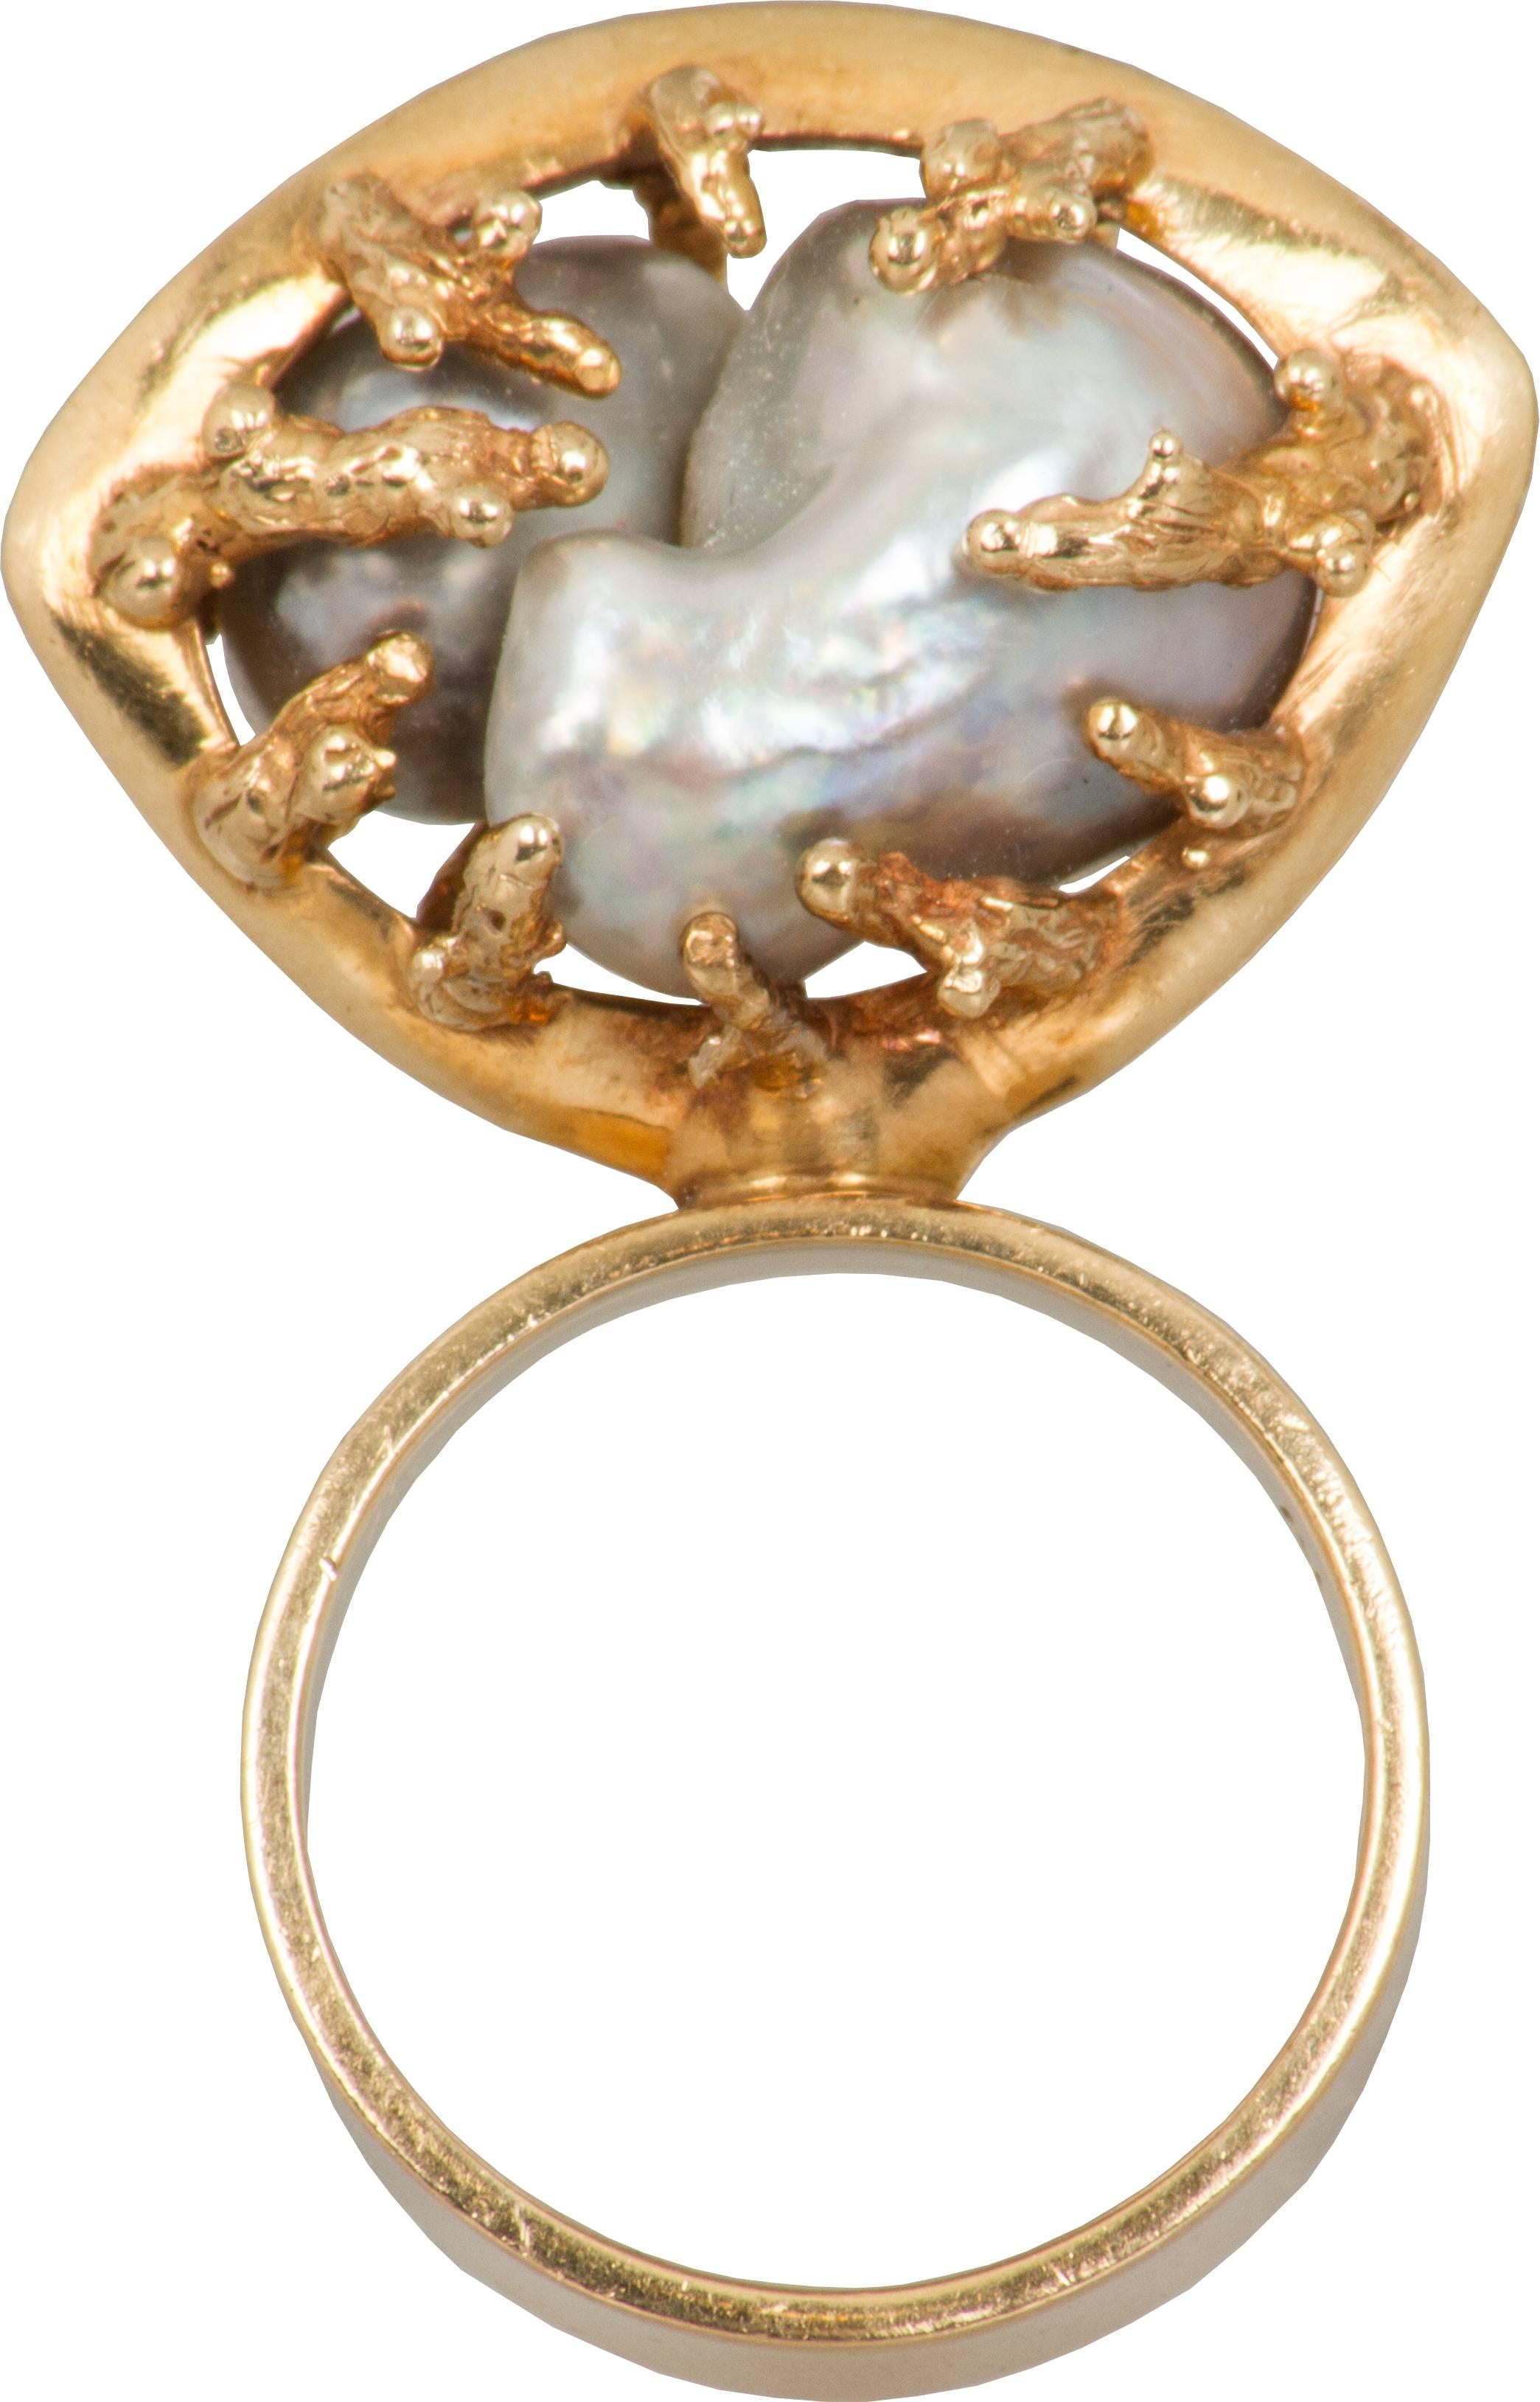 The gold surround is coral like in this modernist ring.

The ring is a size 7.5.